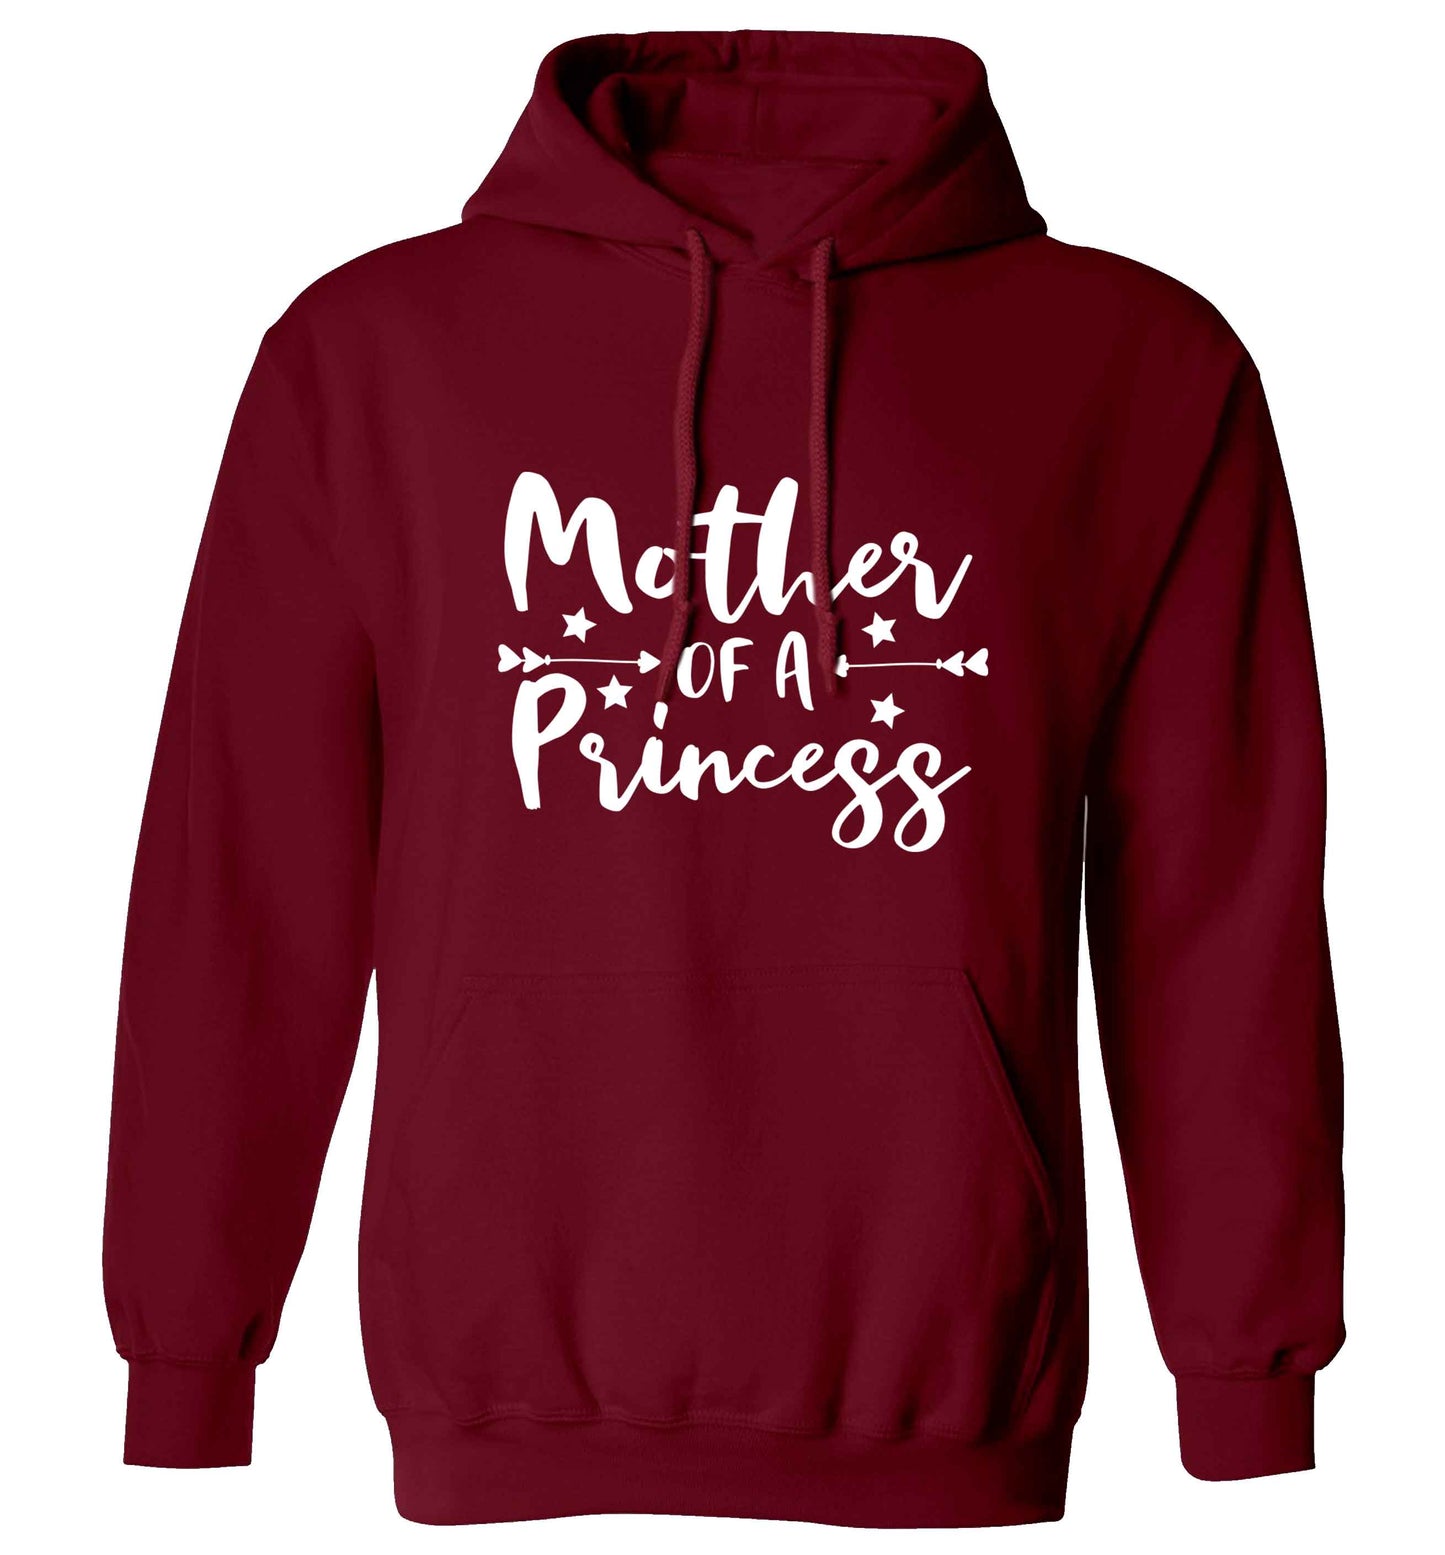 Mother of a princess adults unisex maroon hoodie 2XL